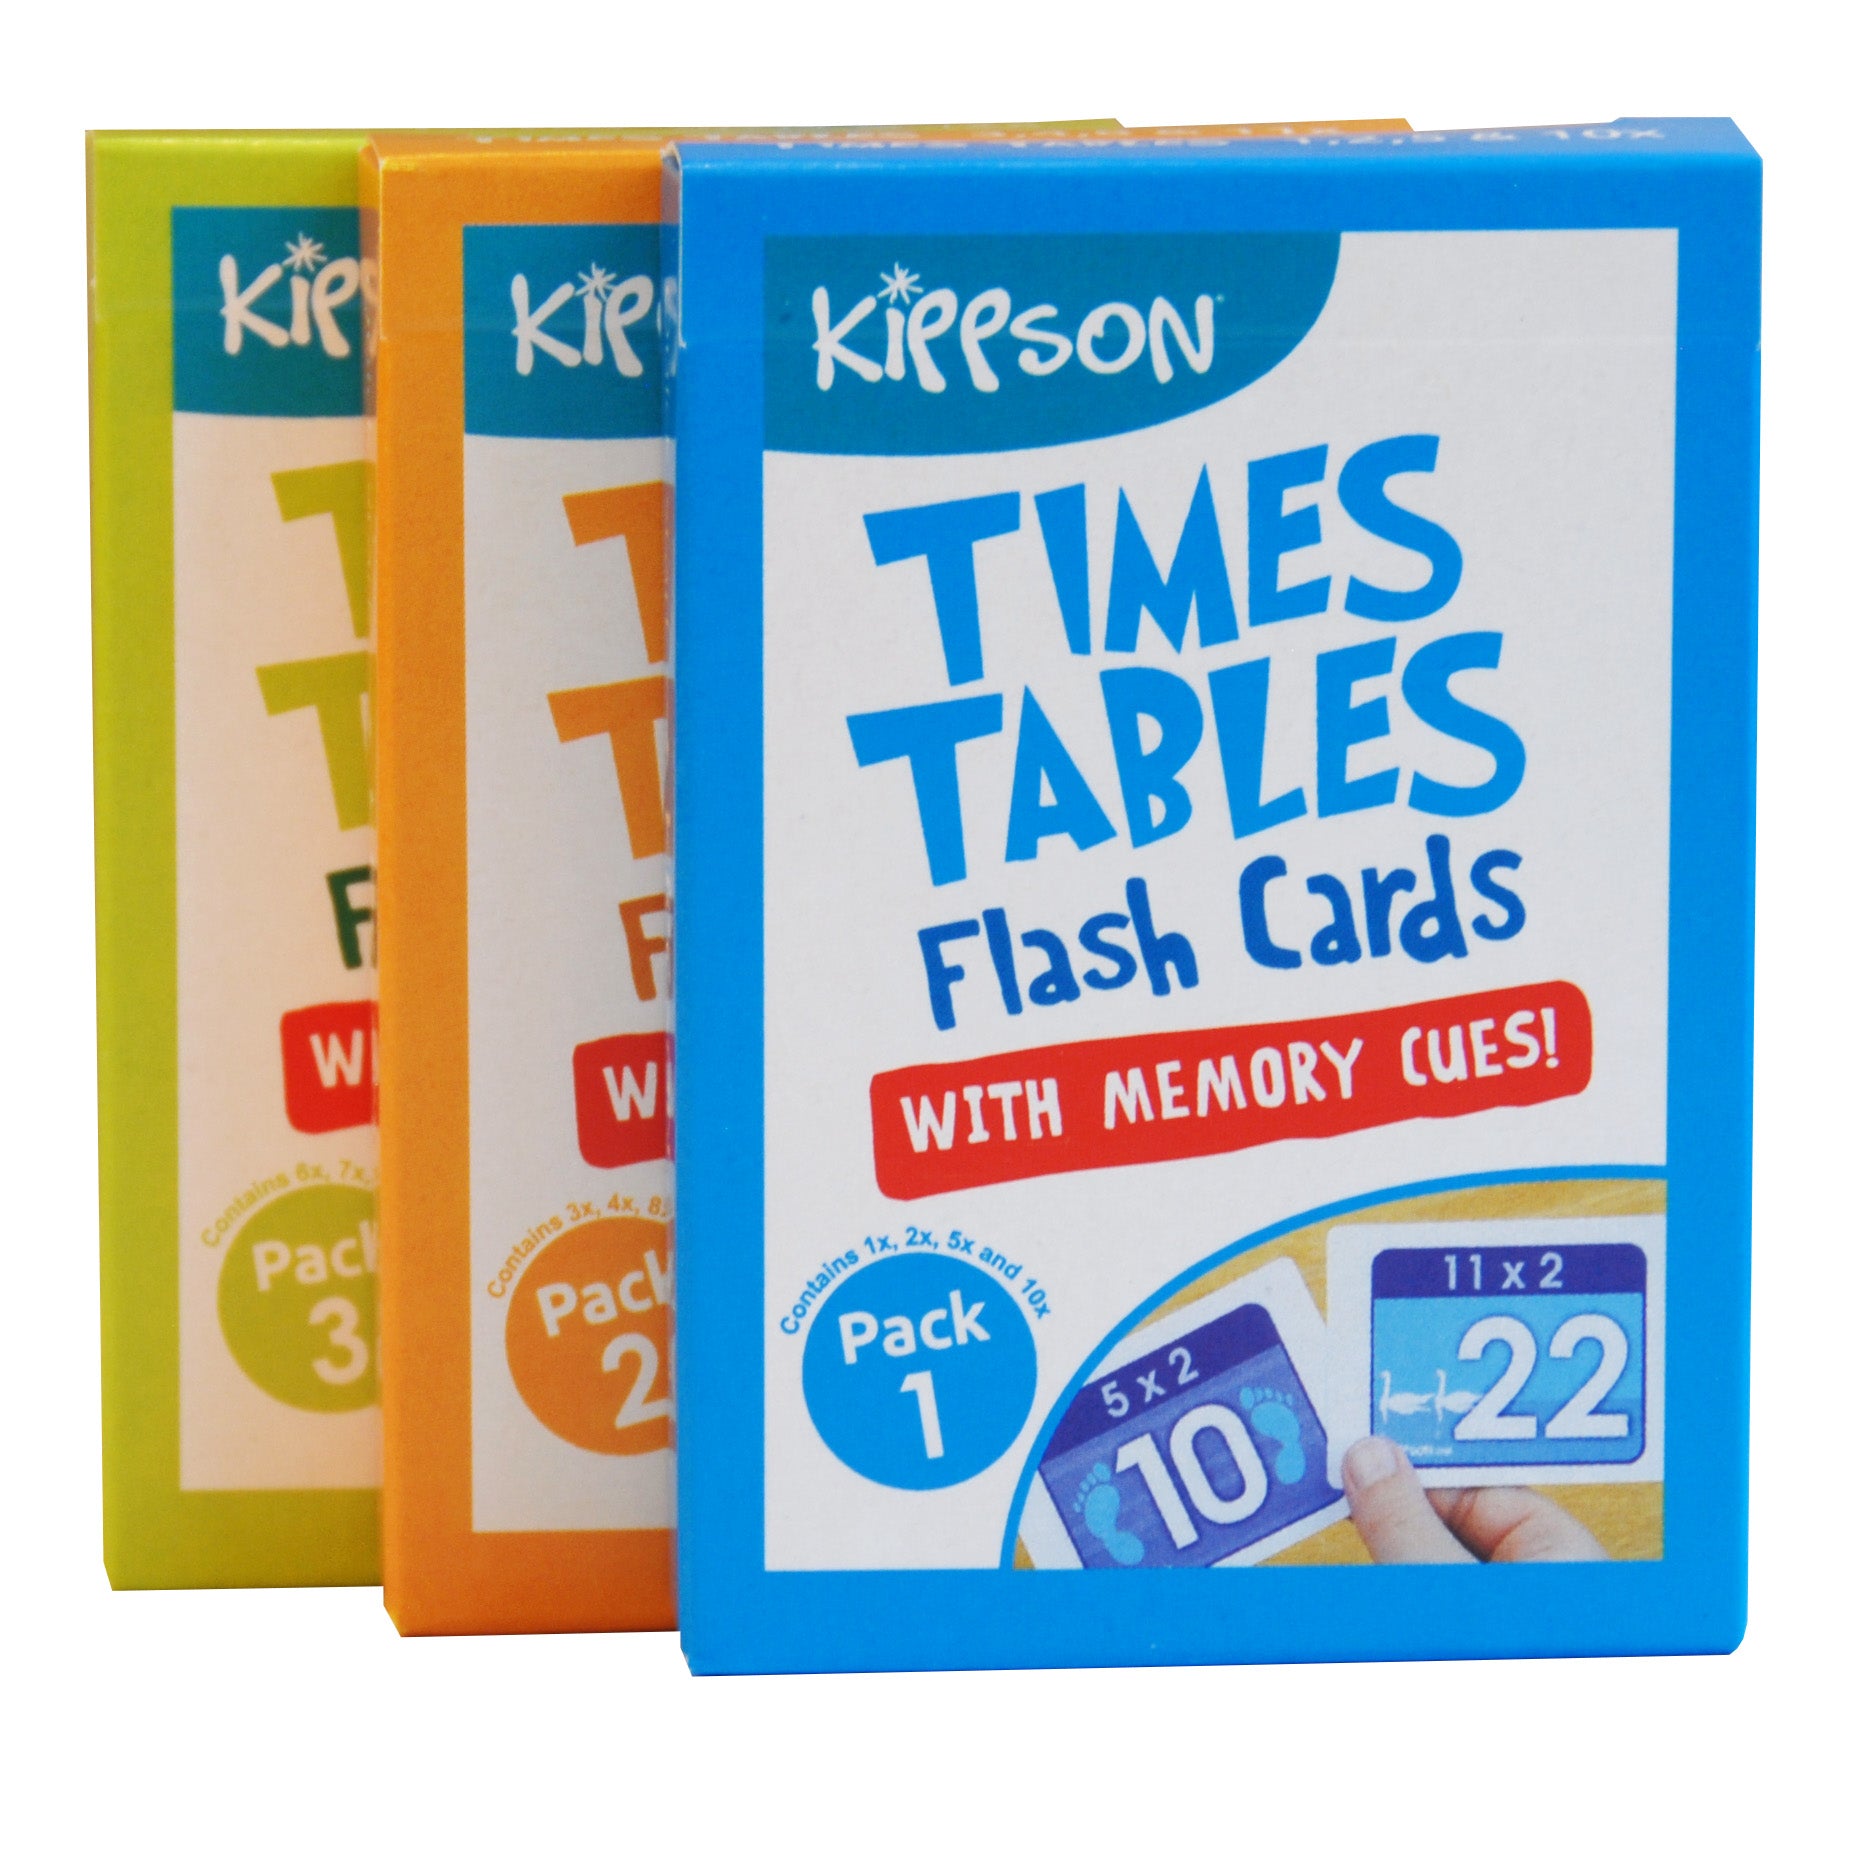 Kippson's times tables flash cards with memory cues showing the three boxes in a line